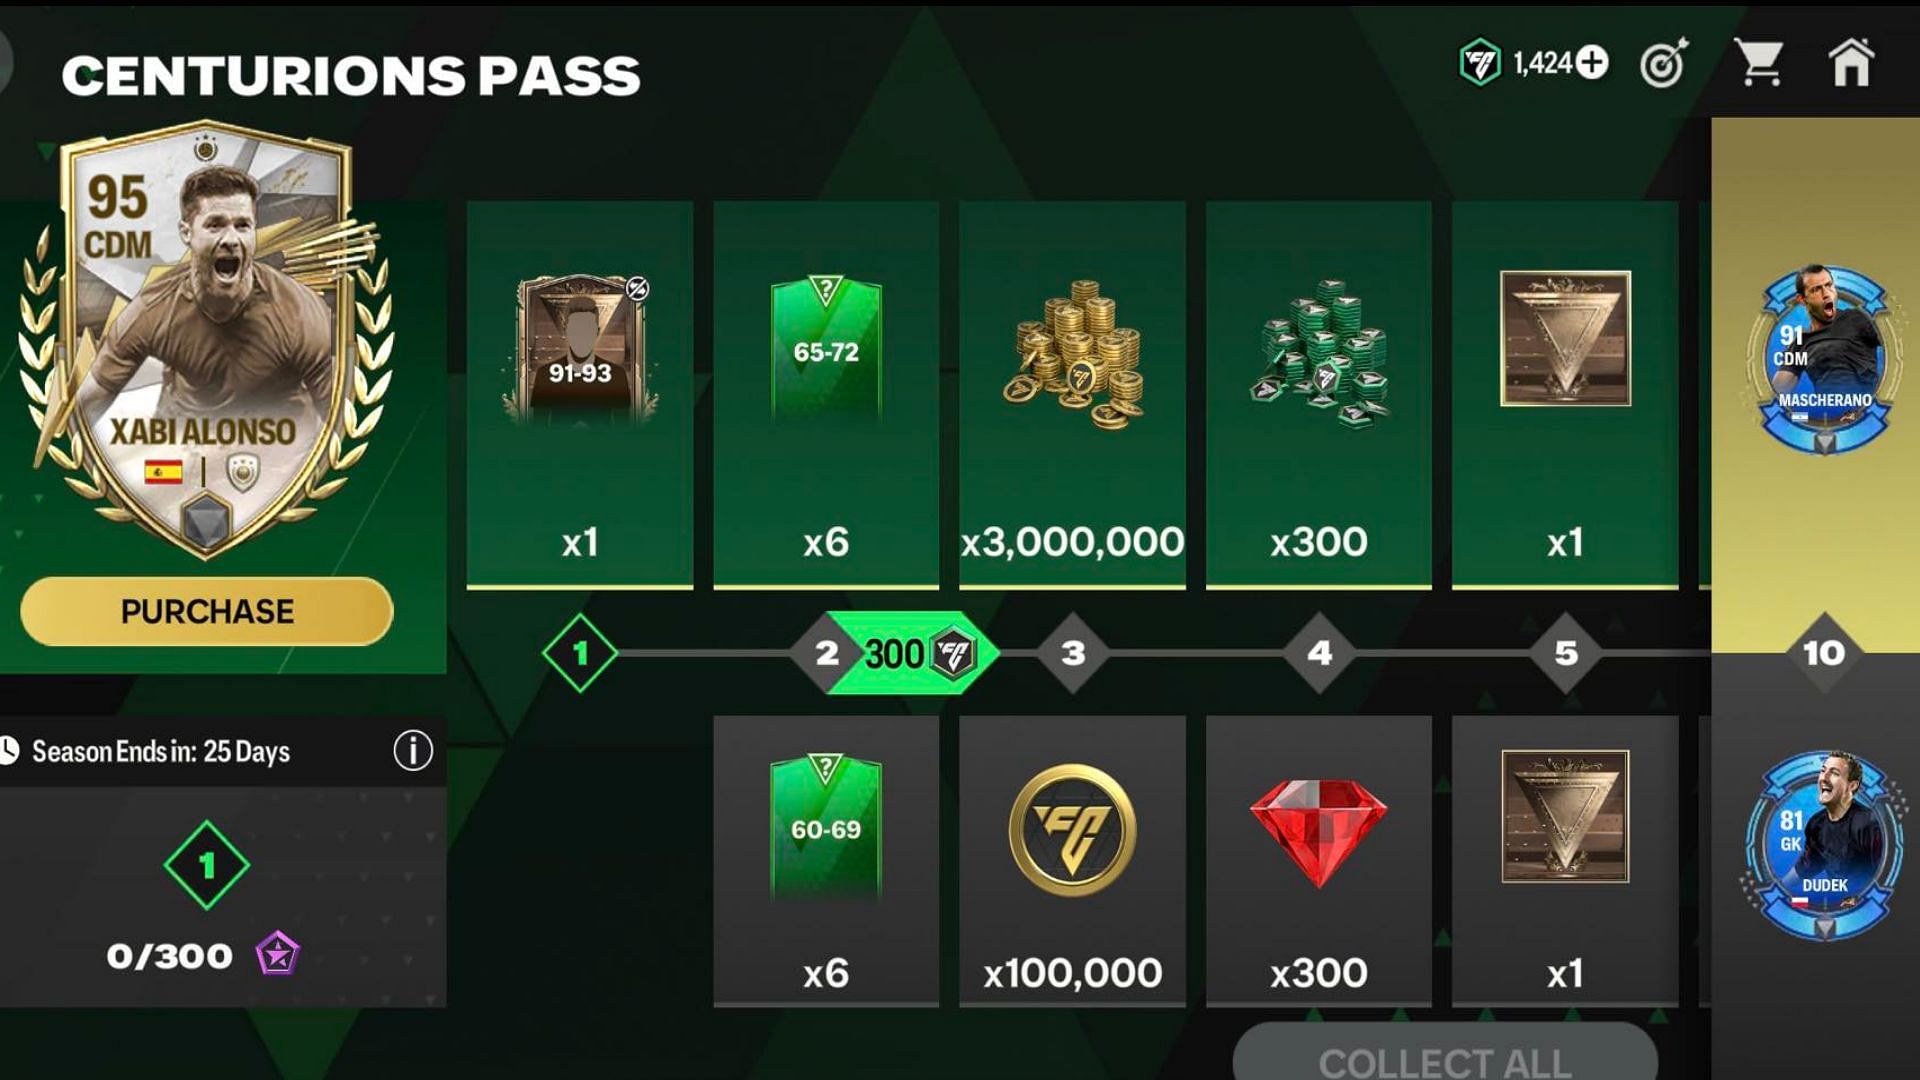 Multiple great rewards are available in the Centurions Star Pass in FC Mobile (Image via EA Sports)